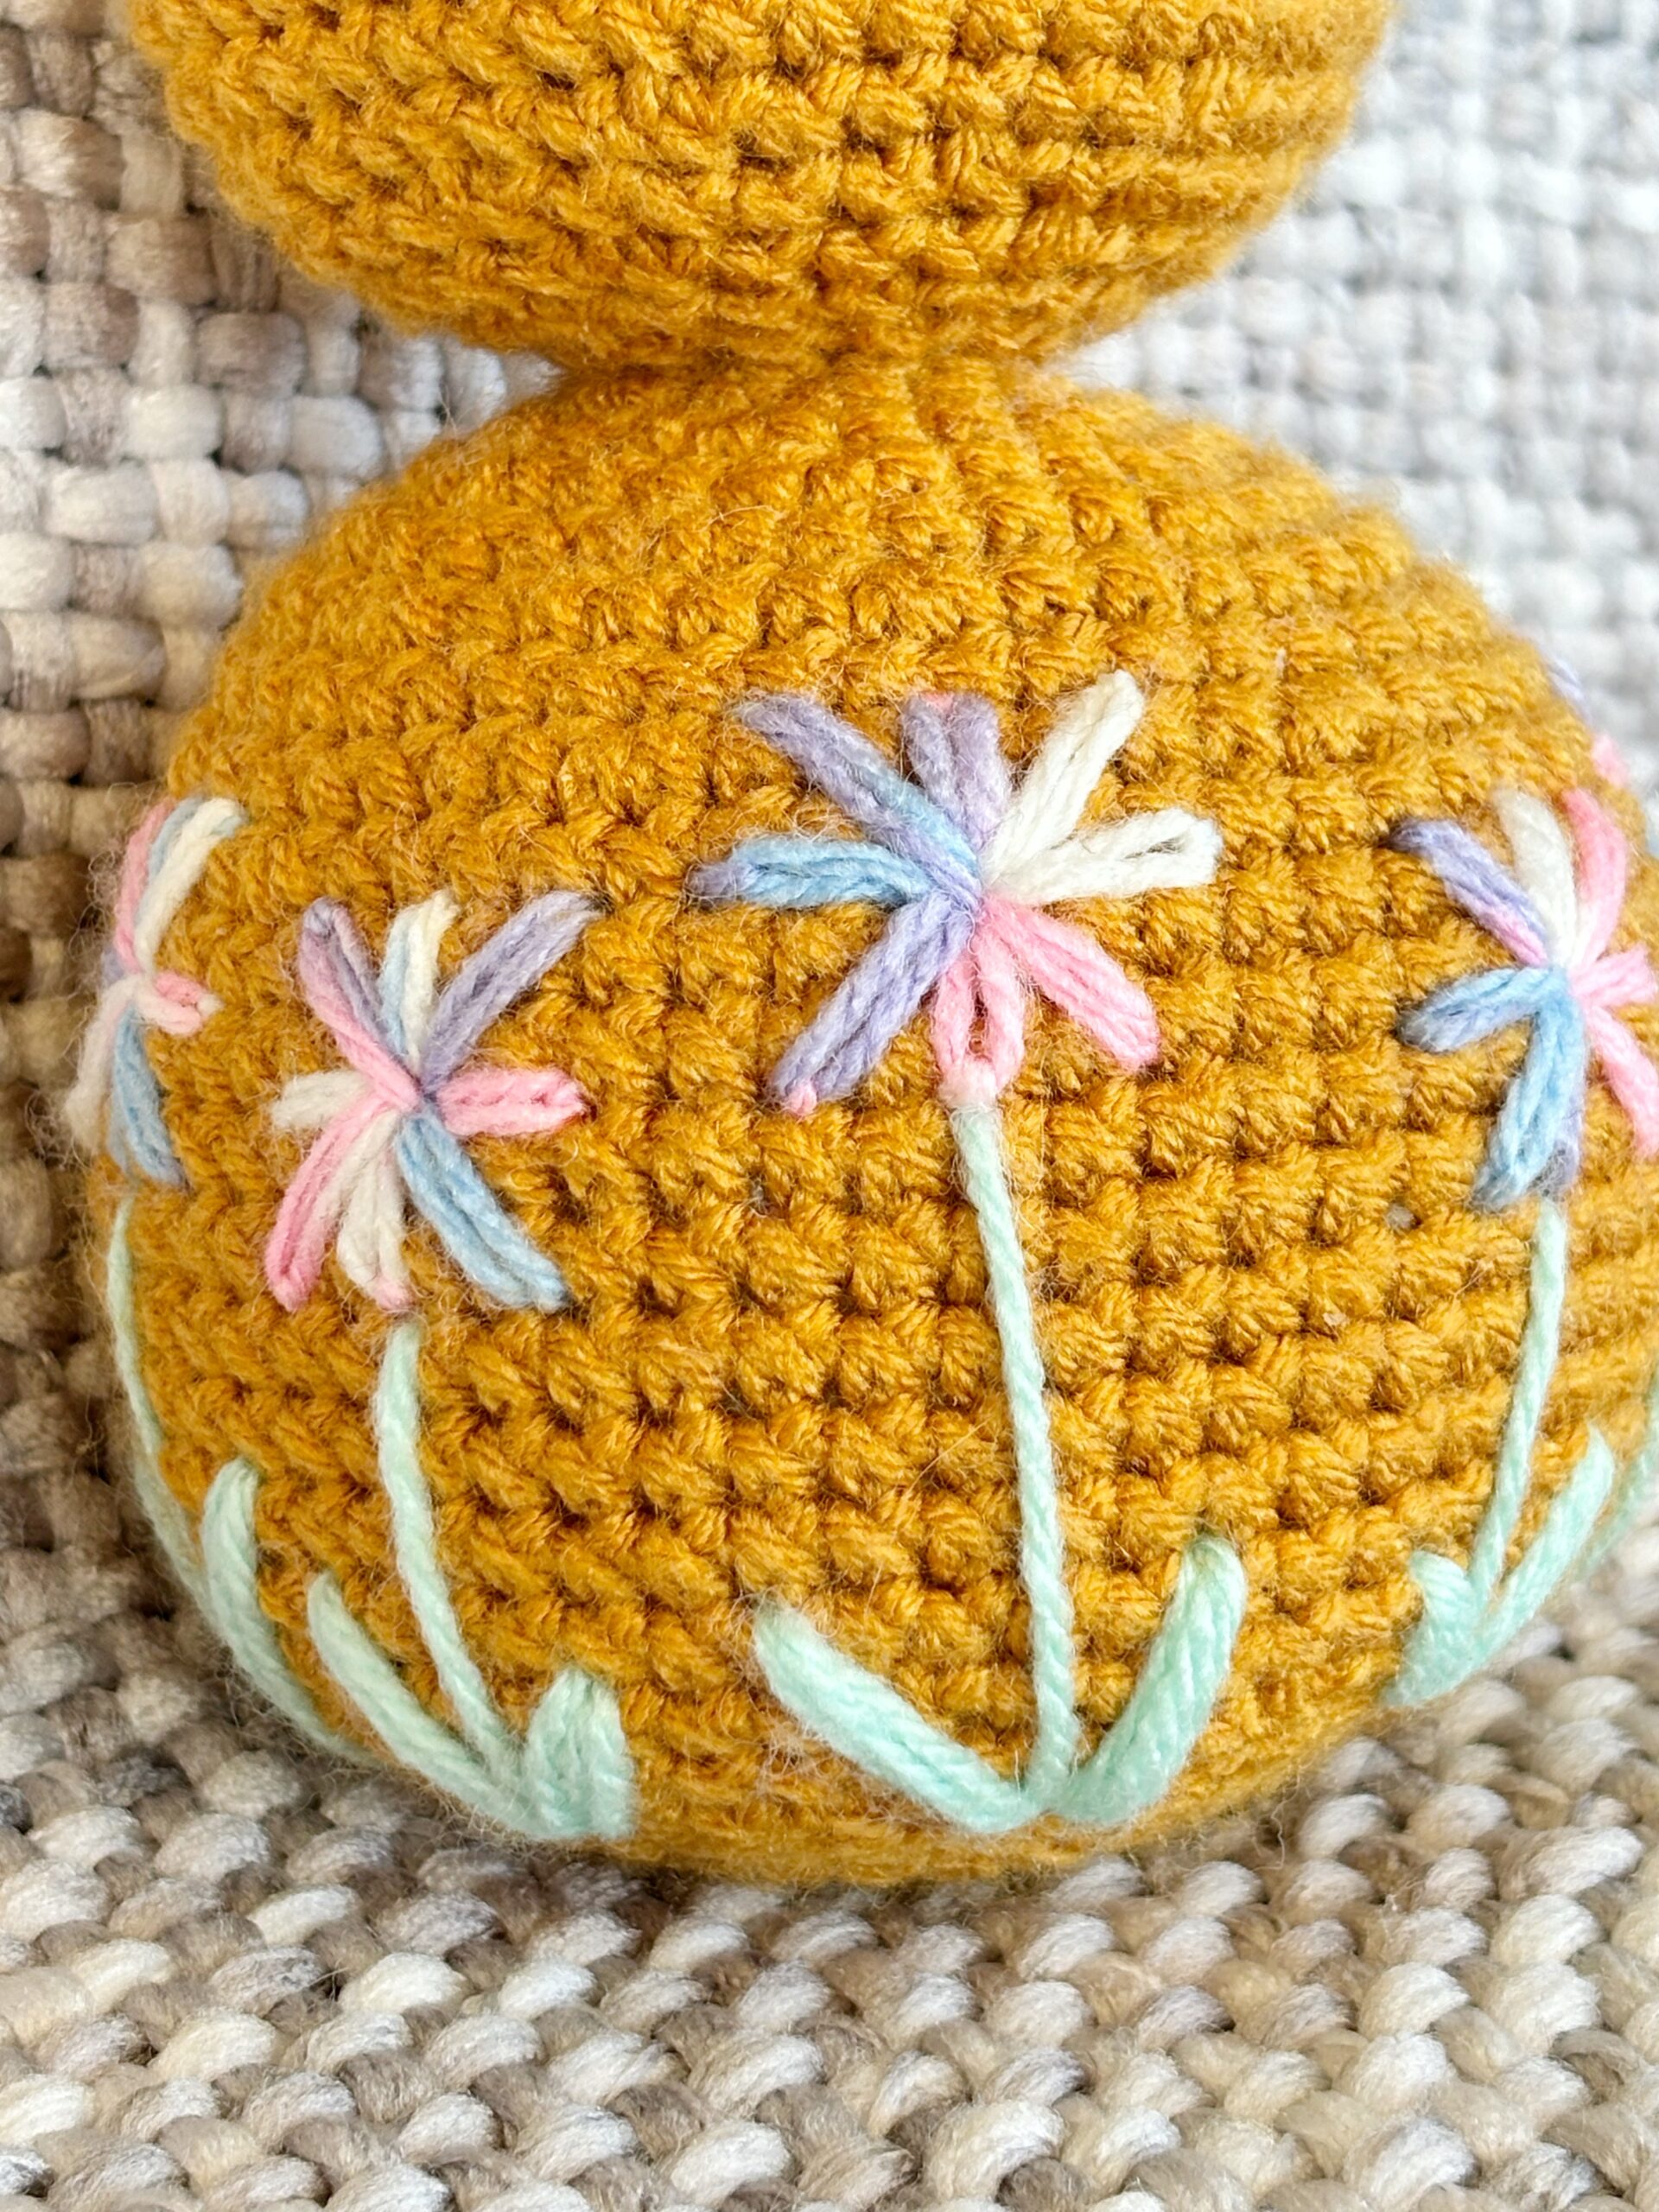 How to Embroider on Amigurumi Beyond the Basics